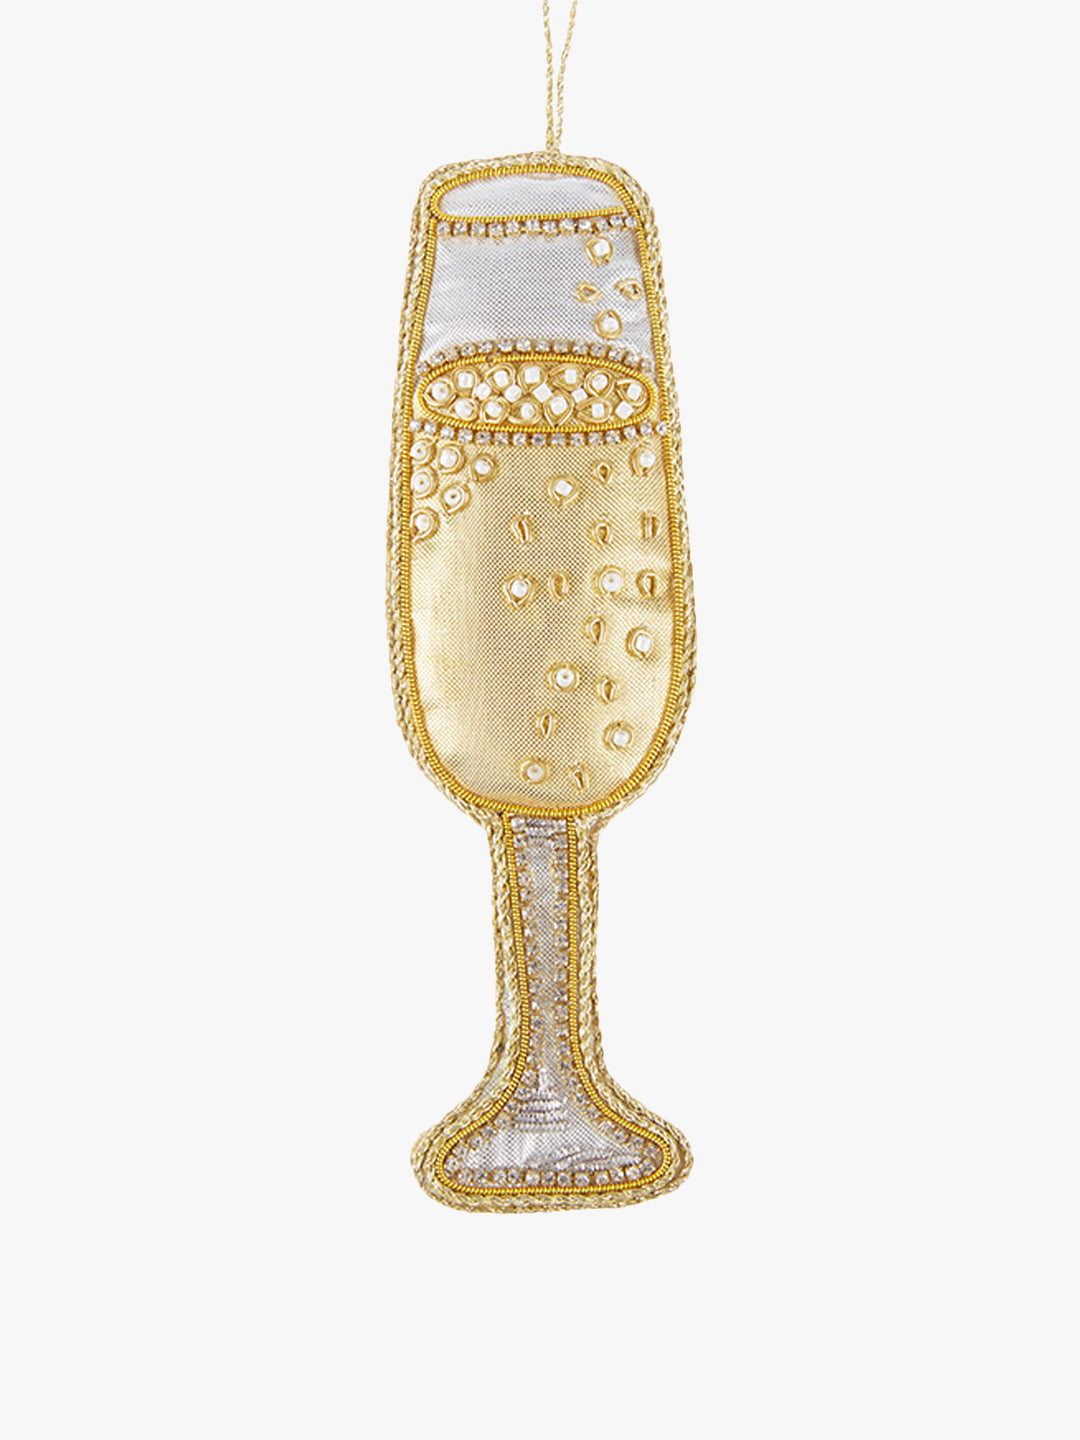 Champagne Flute Decoration by Tinker Tailor London